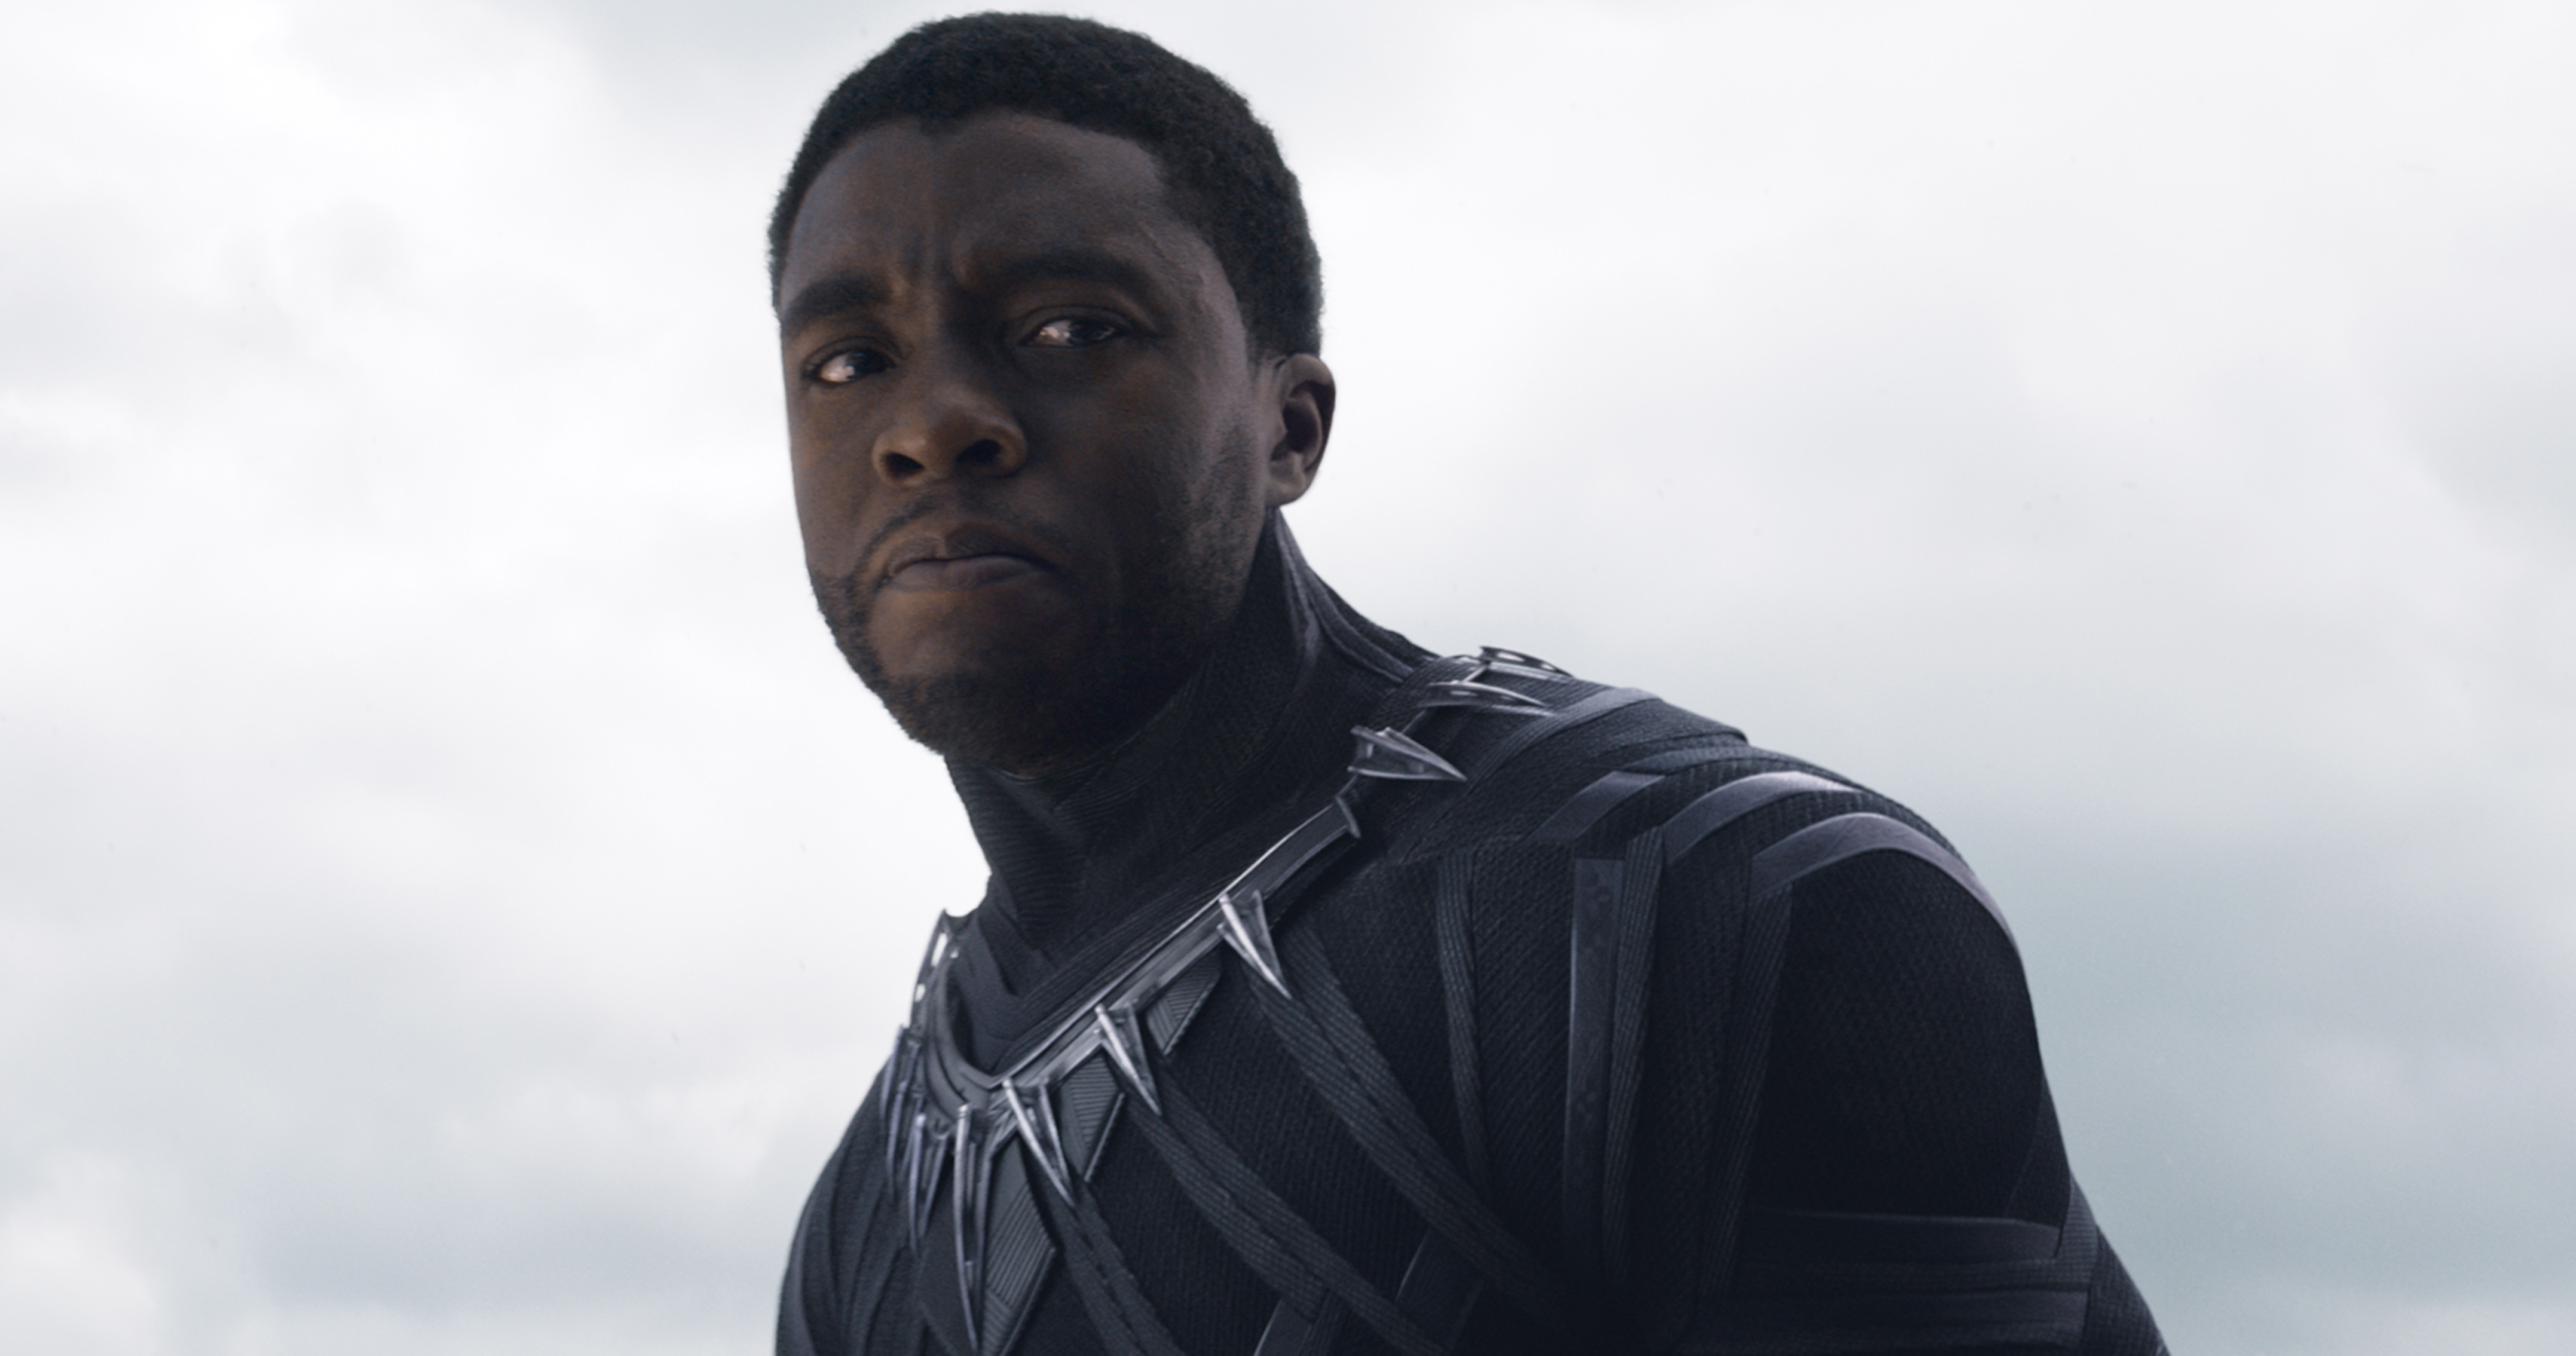 Black Panther Unmask In Civil War Full HD Wallpaper And Background